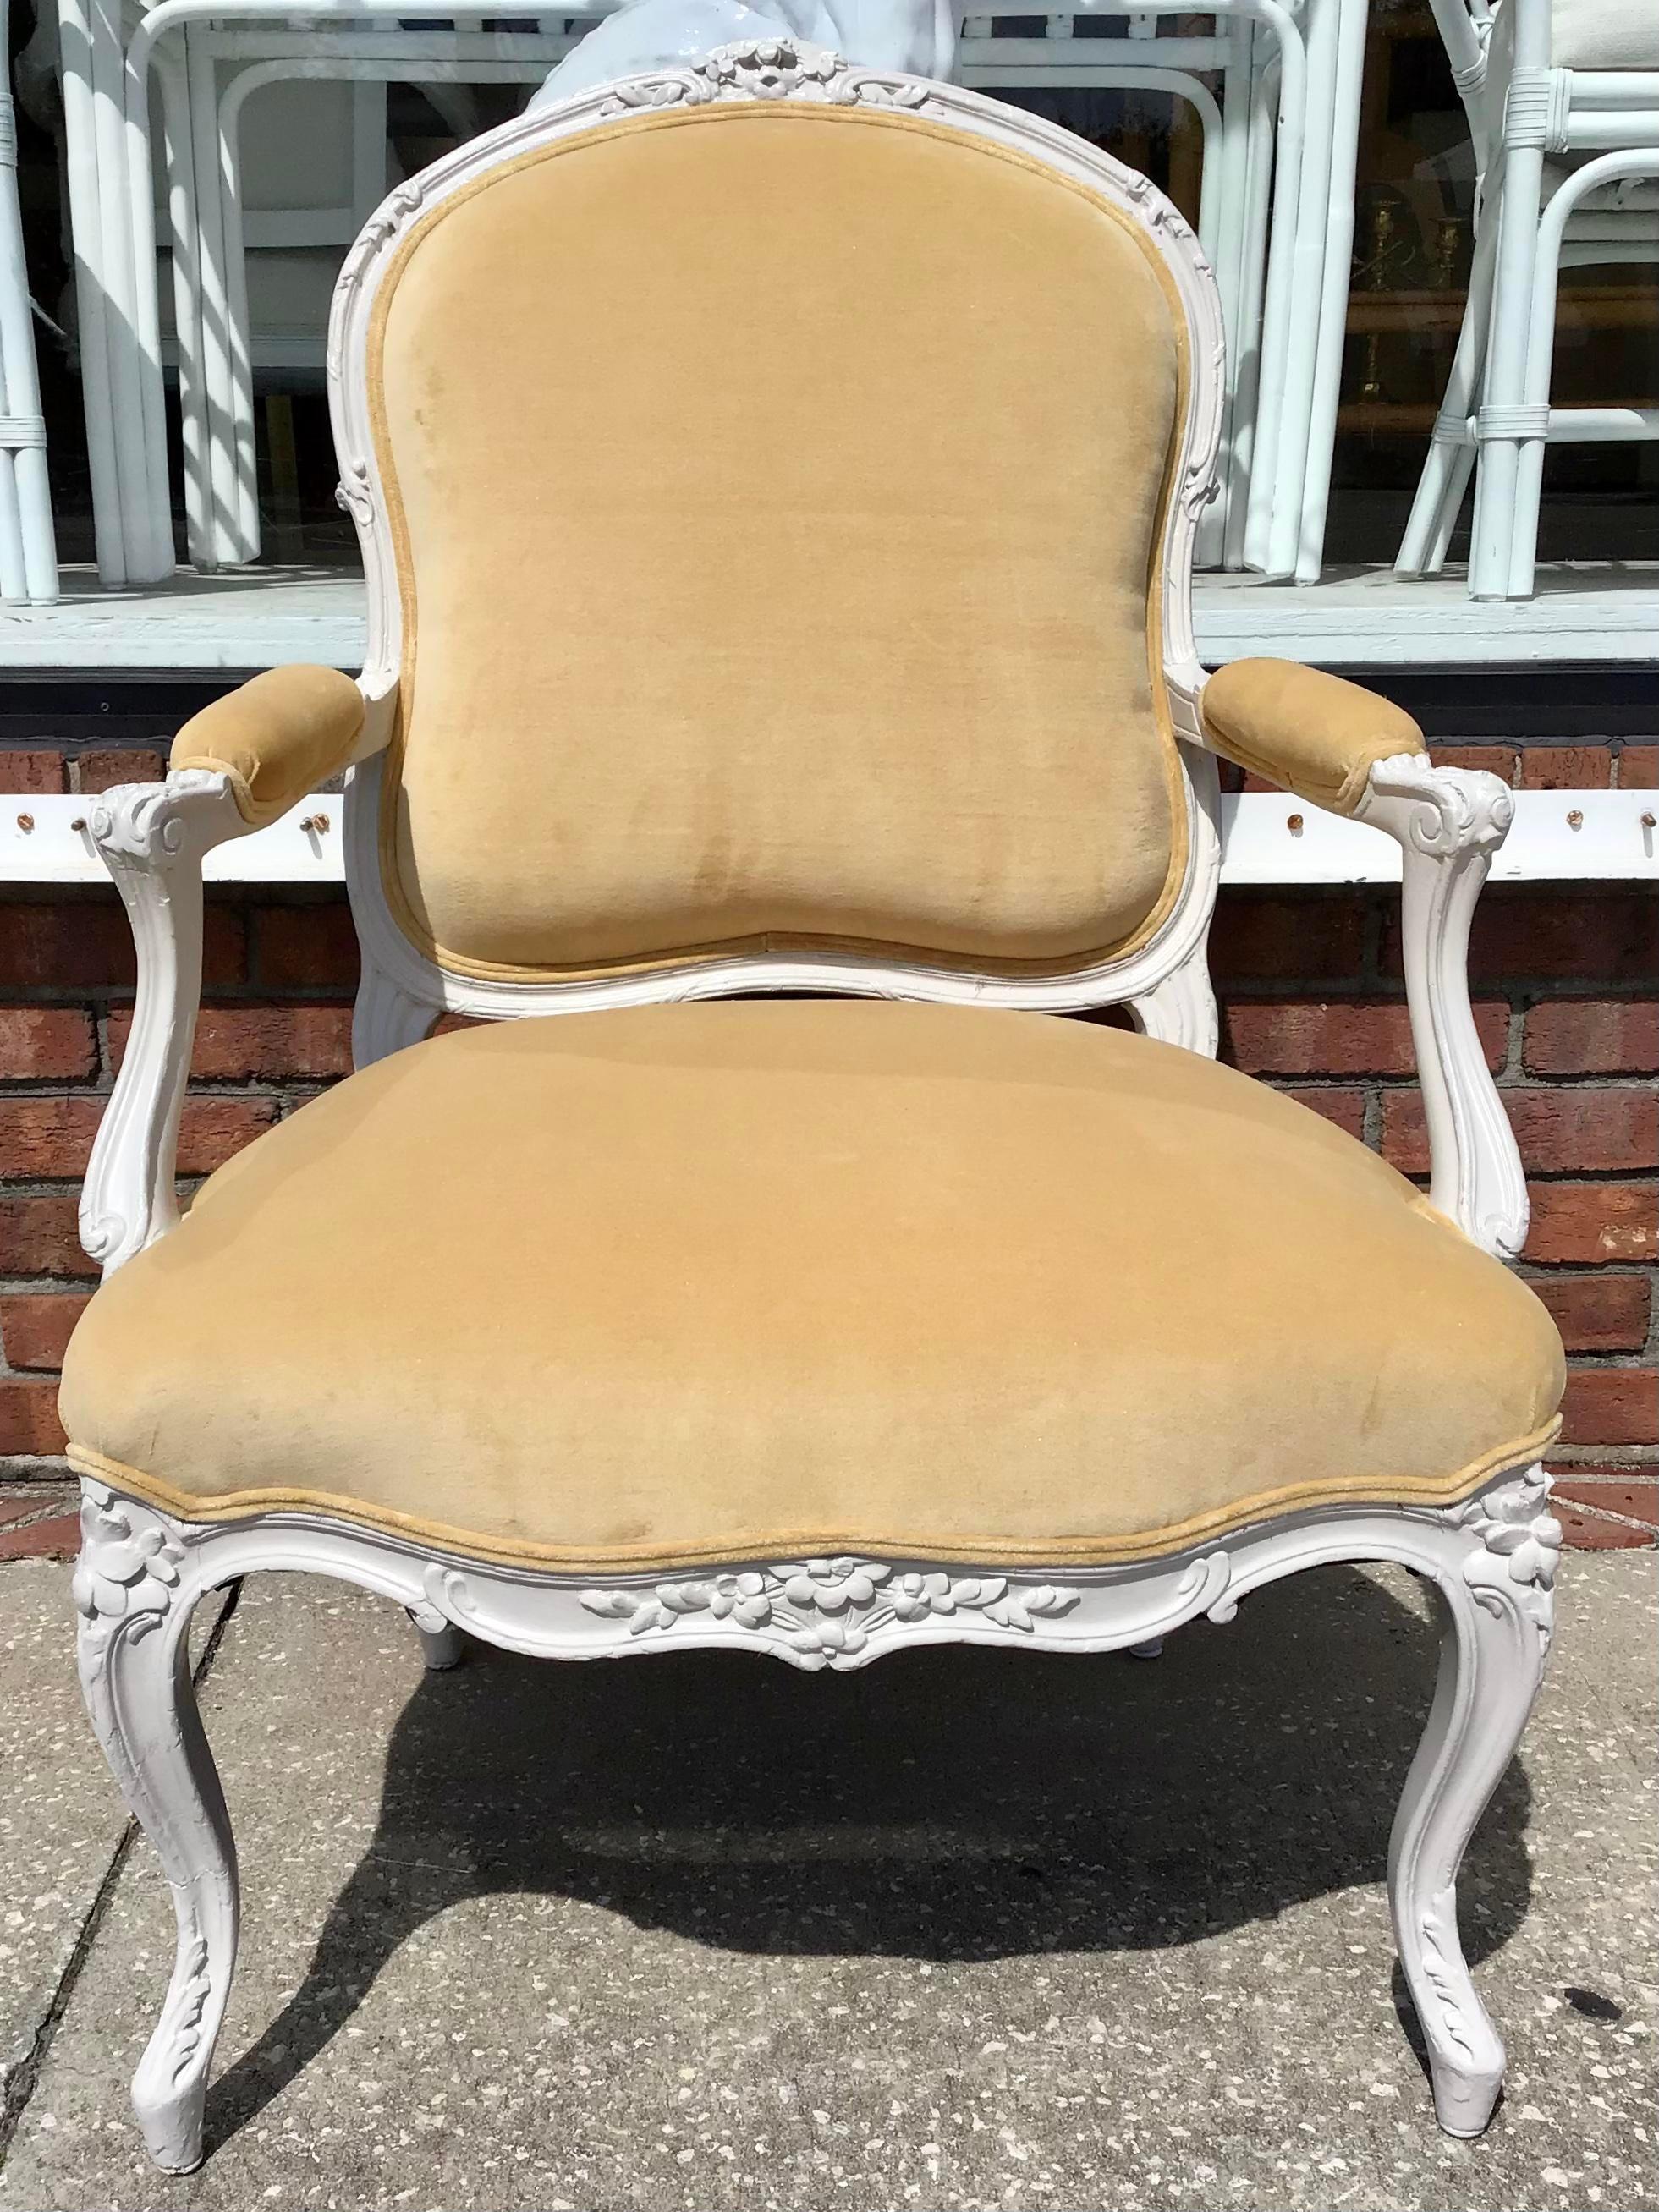 Gorgeous French Louis XV arm chair from the 19th century. All new gray lacquer finish and new Todd Hase gold velvet upholstery. Add some classic style to your home.